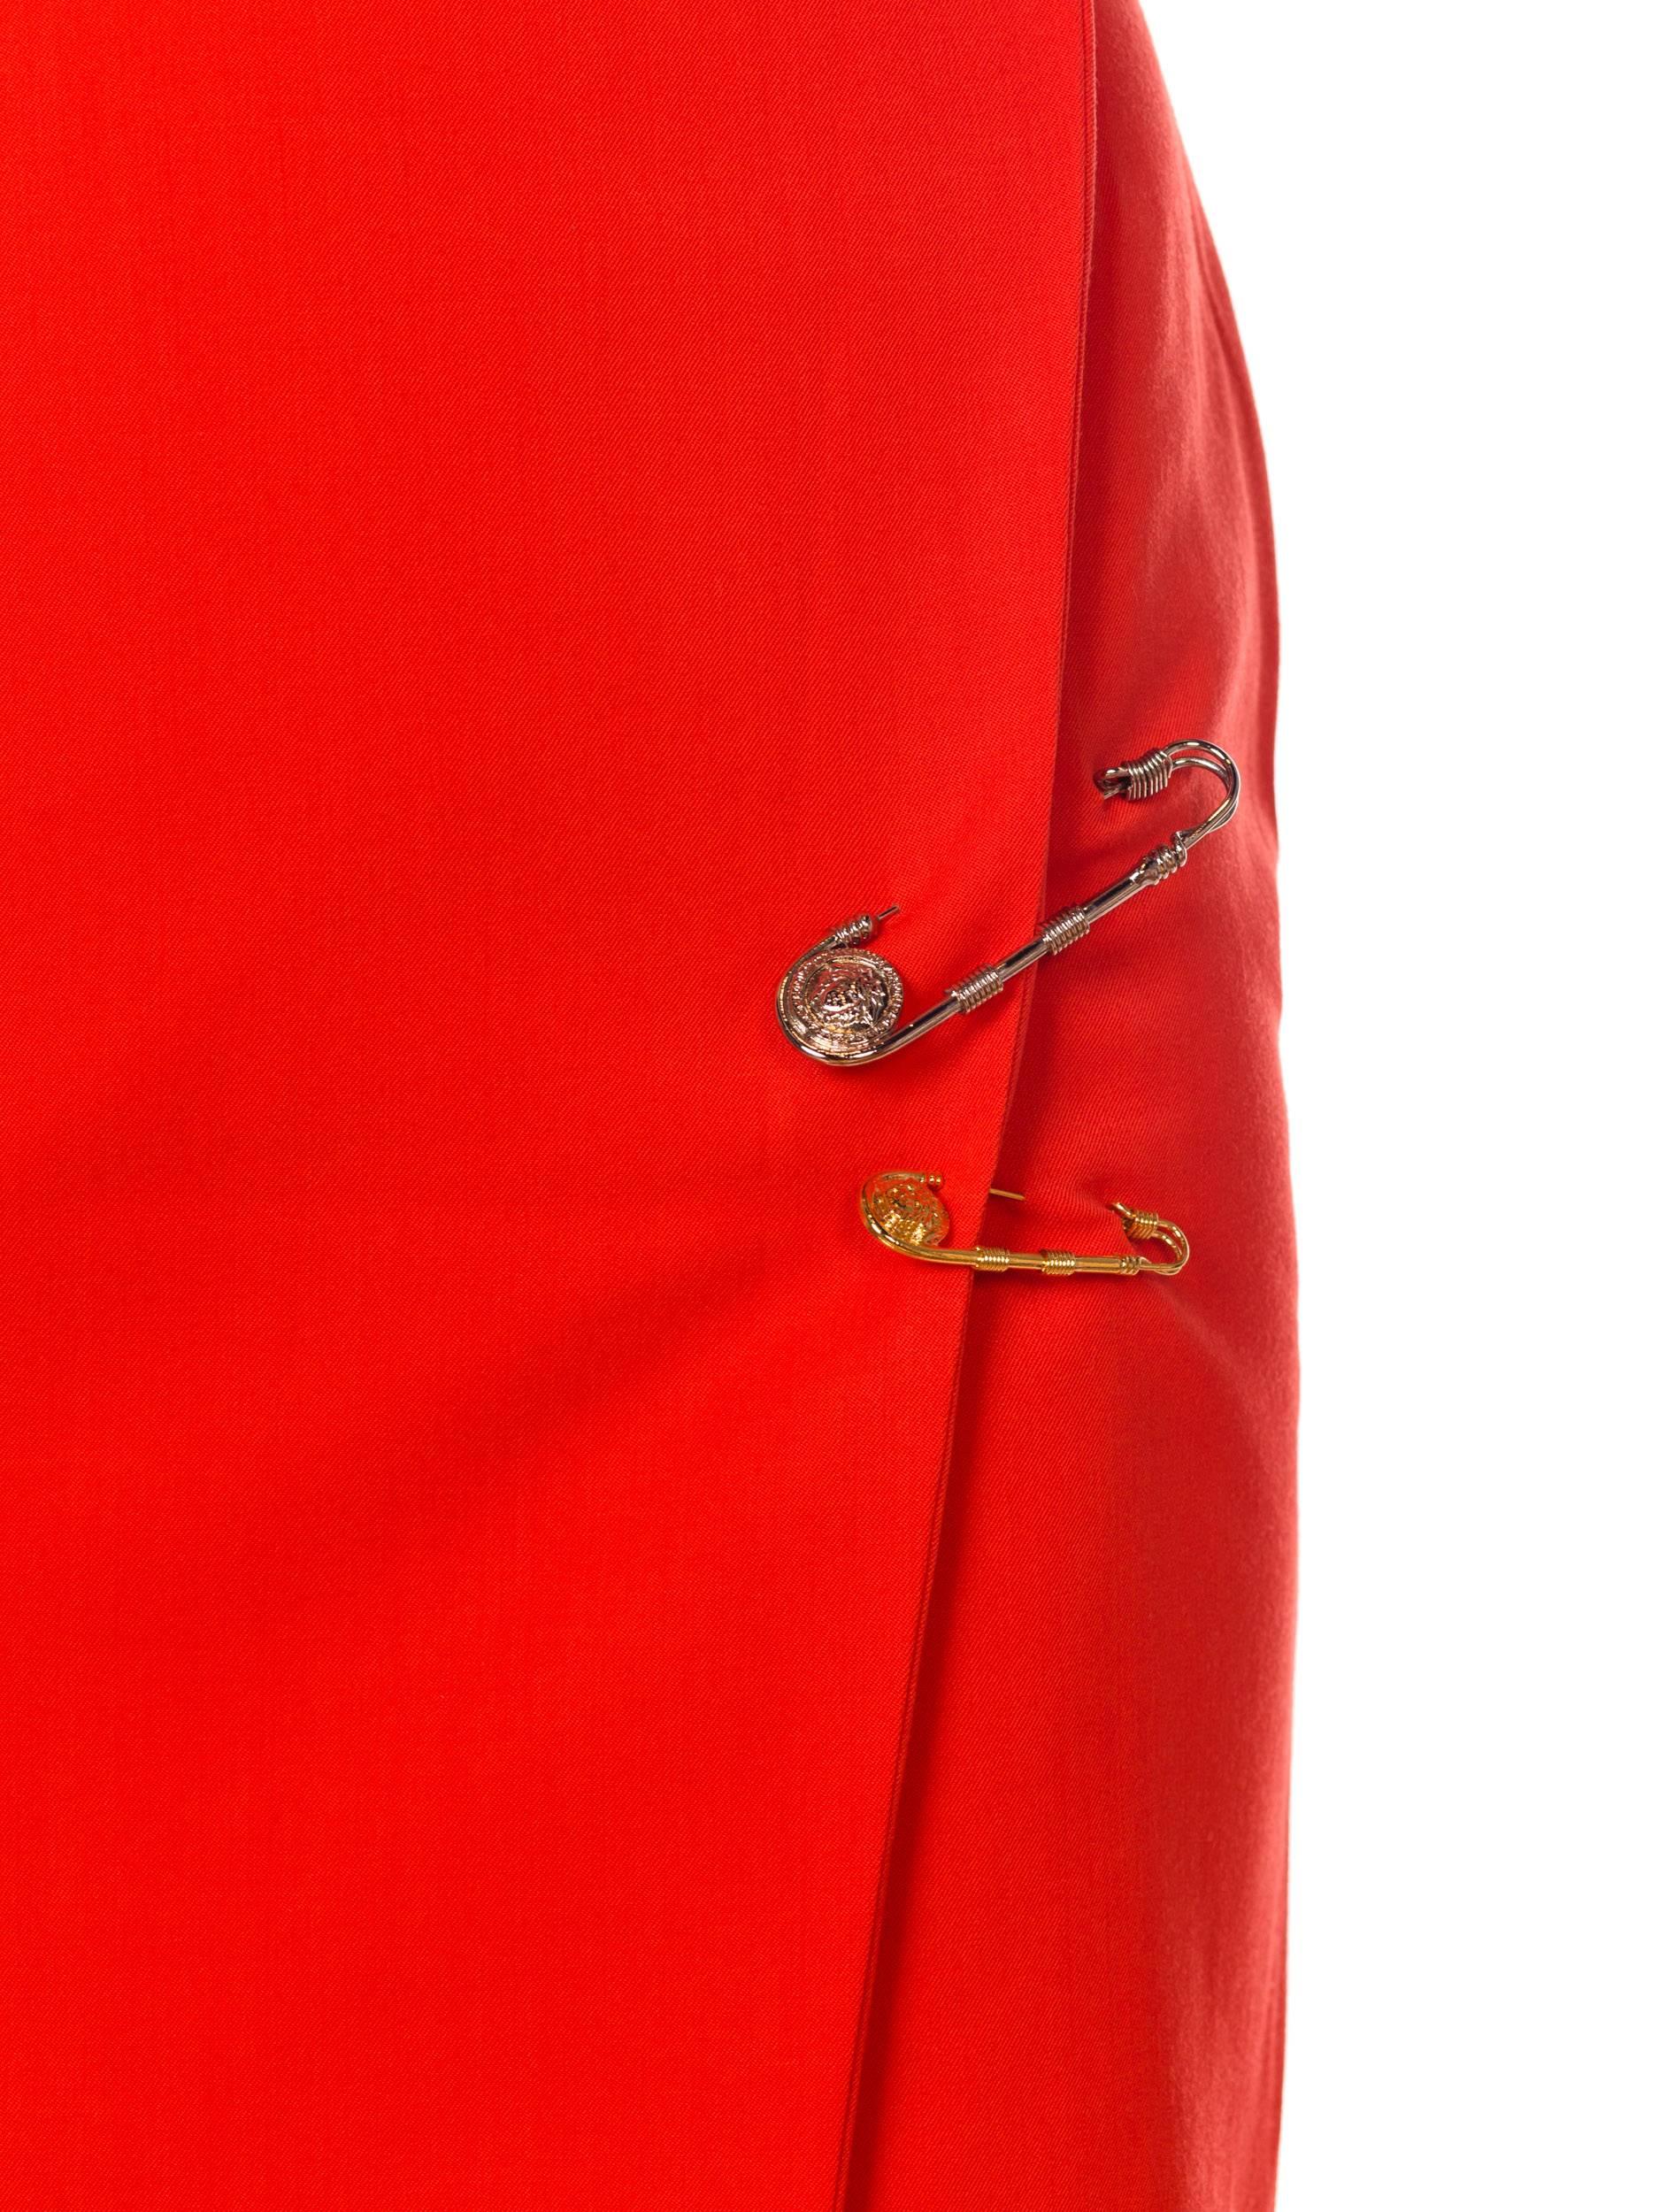 Gianni Versace 1990s Punk Collection orange Safety Pin Skirt